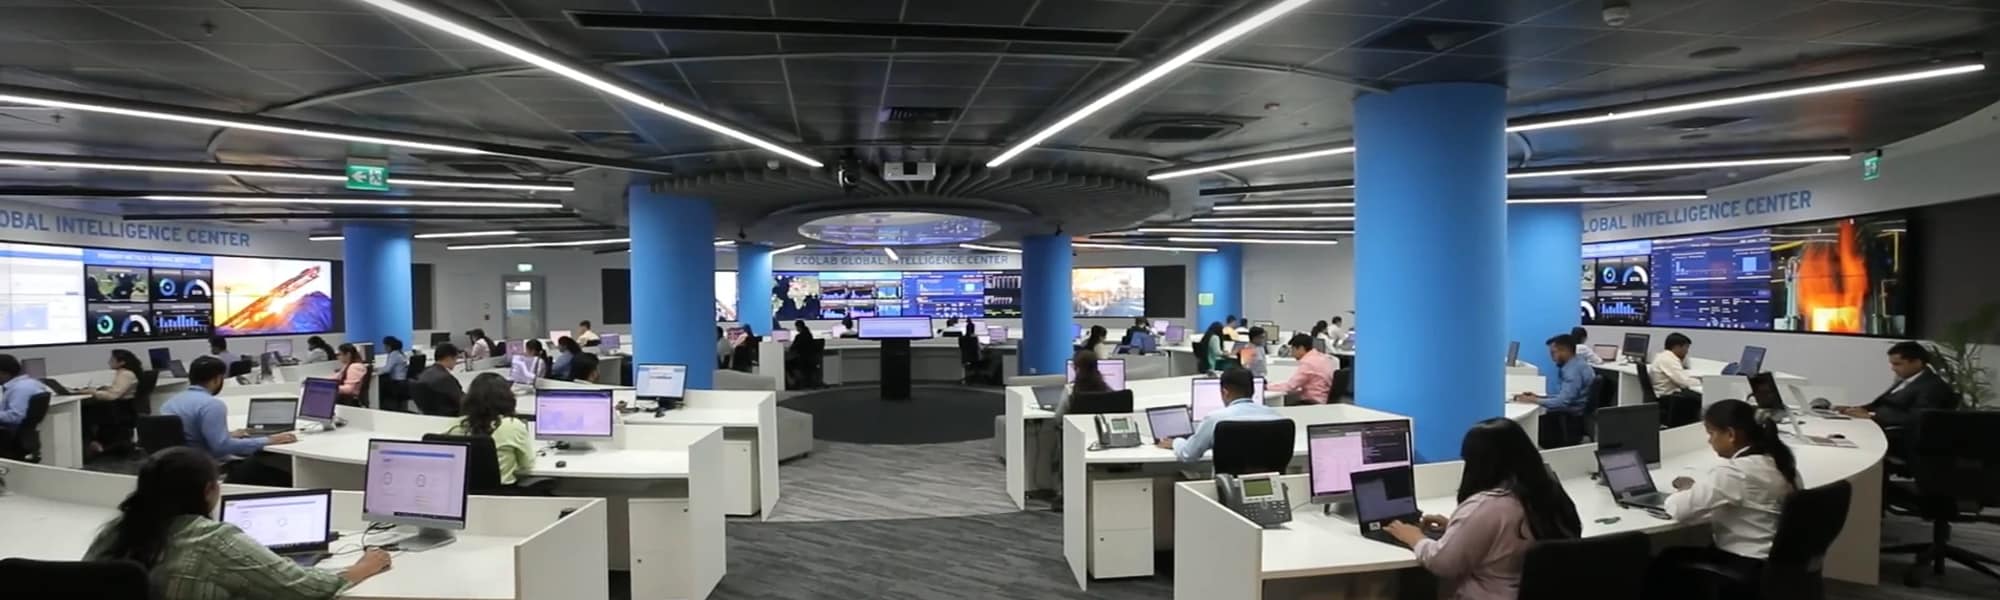 A view of the Ecolab Global Intelligence Center (EGIC) hub in Pune, India